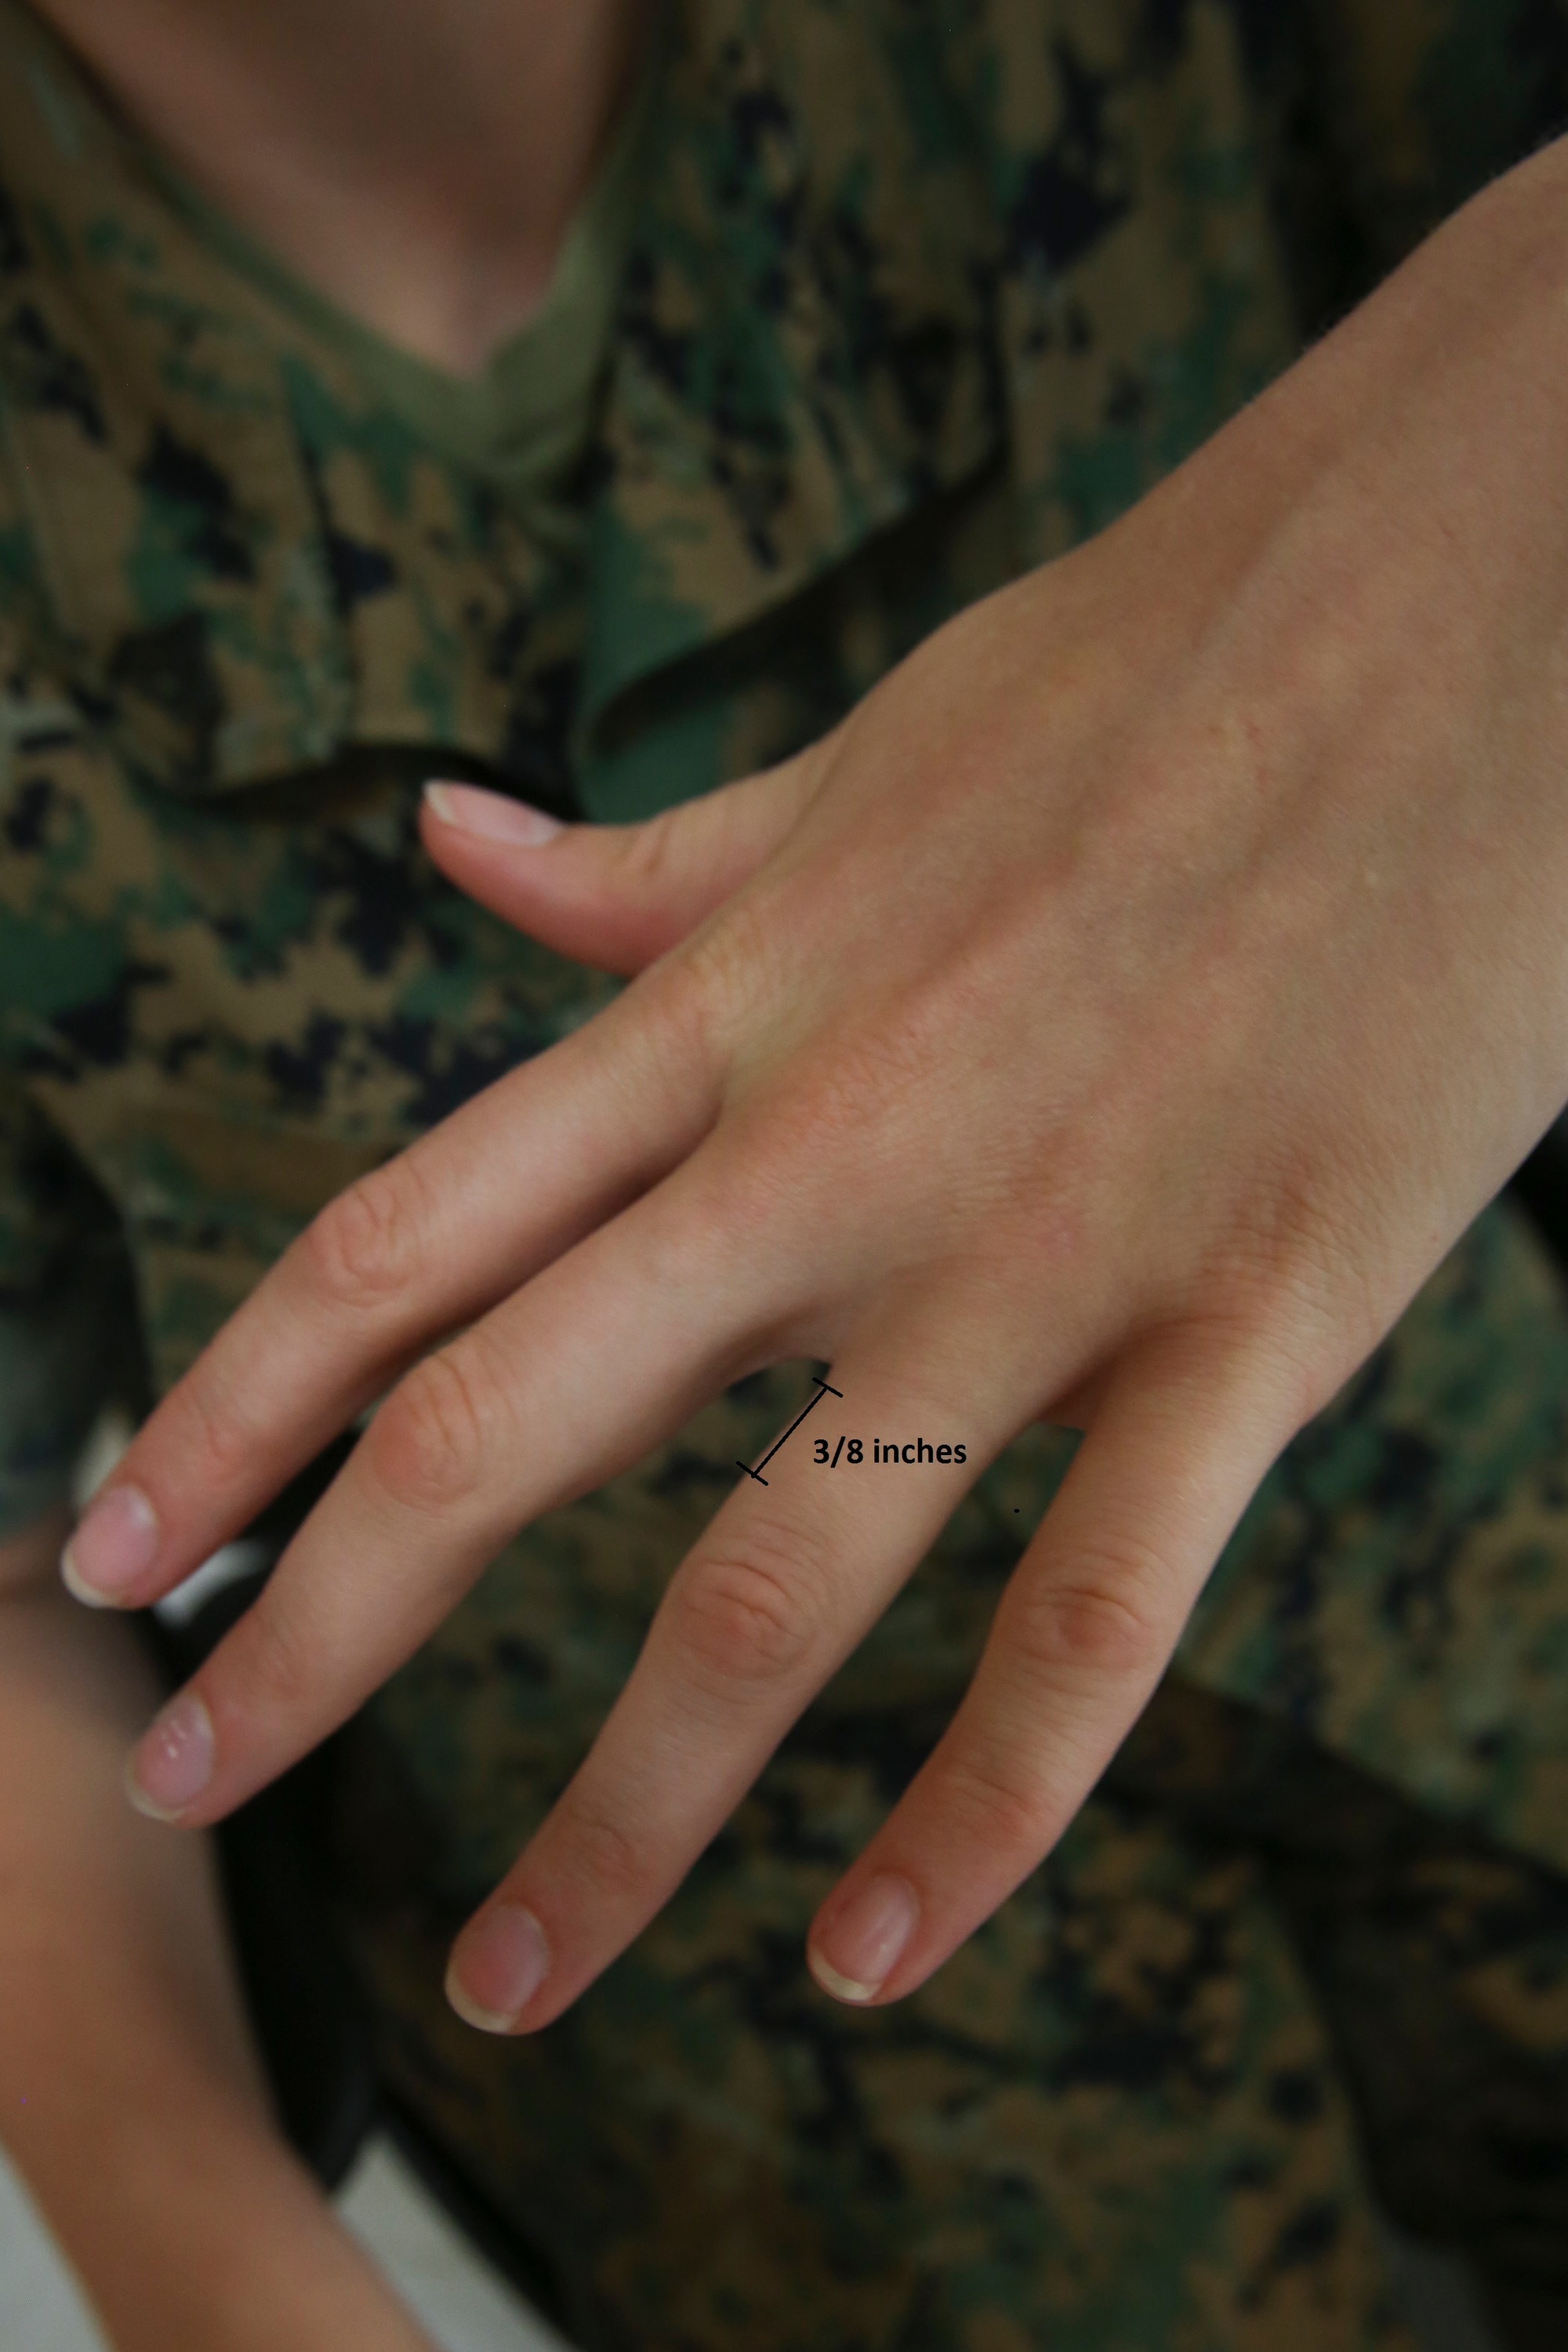 Its official Army issues new tattoo rules  13wmazcom